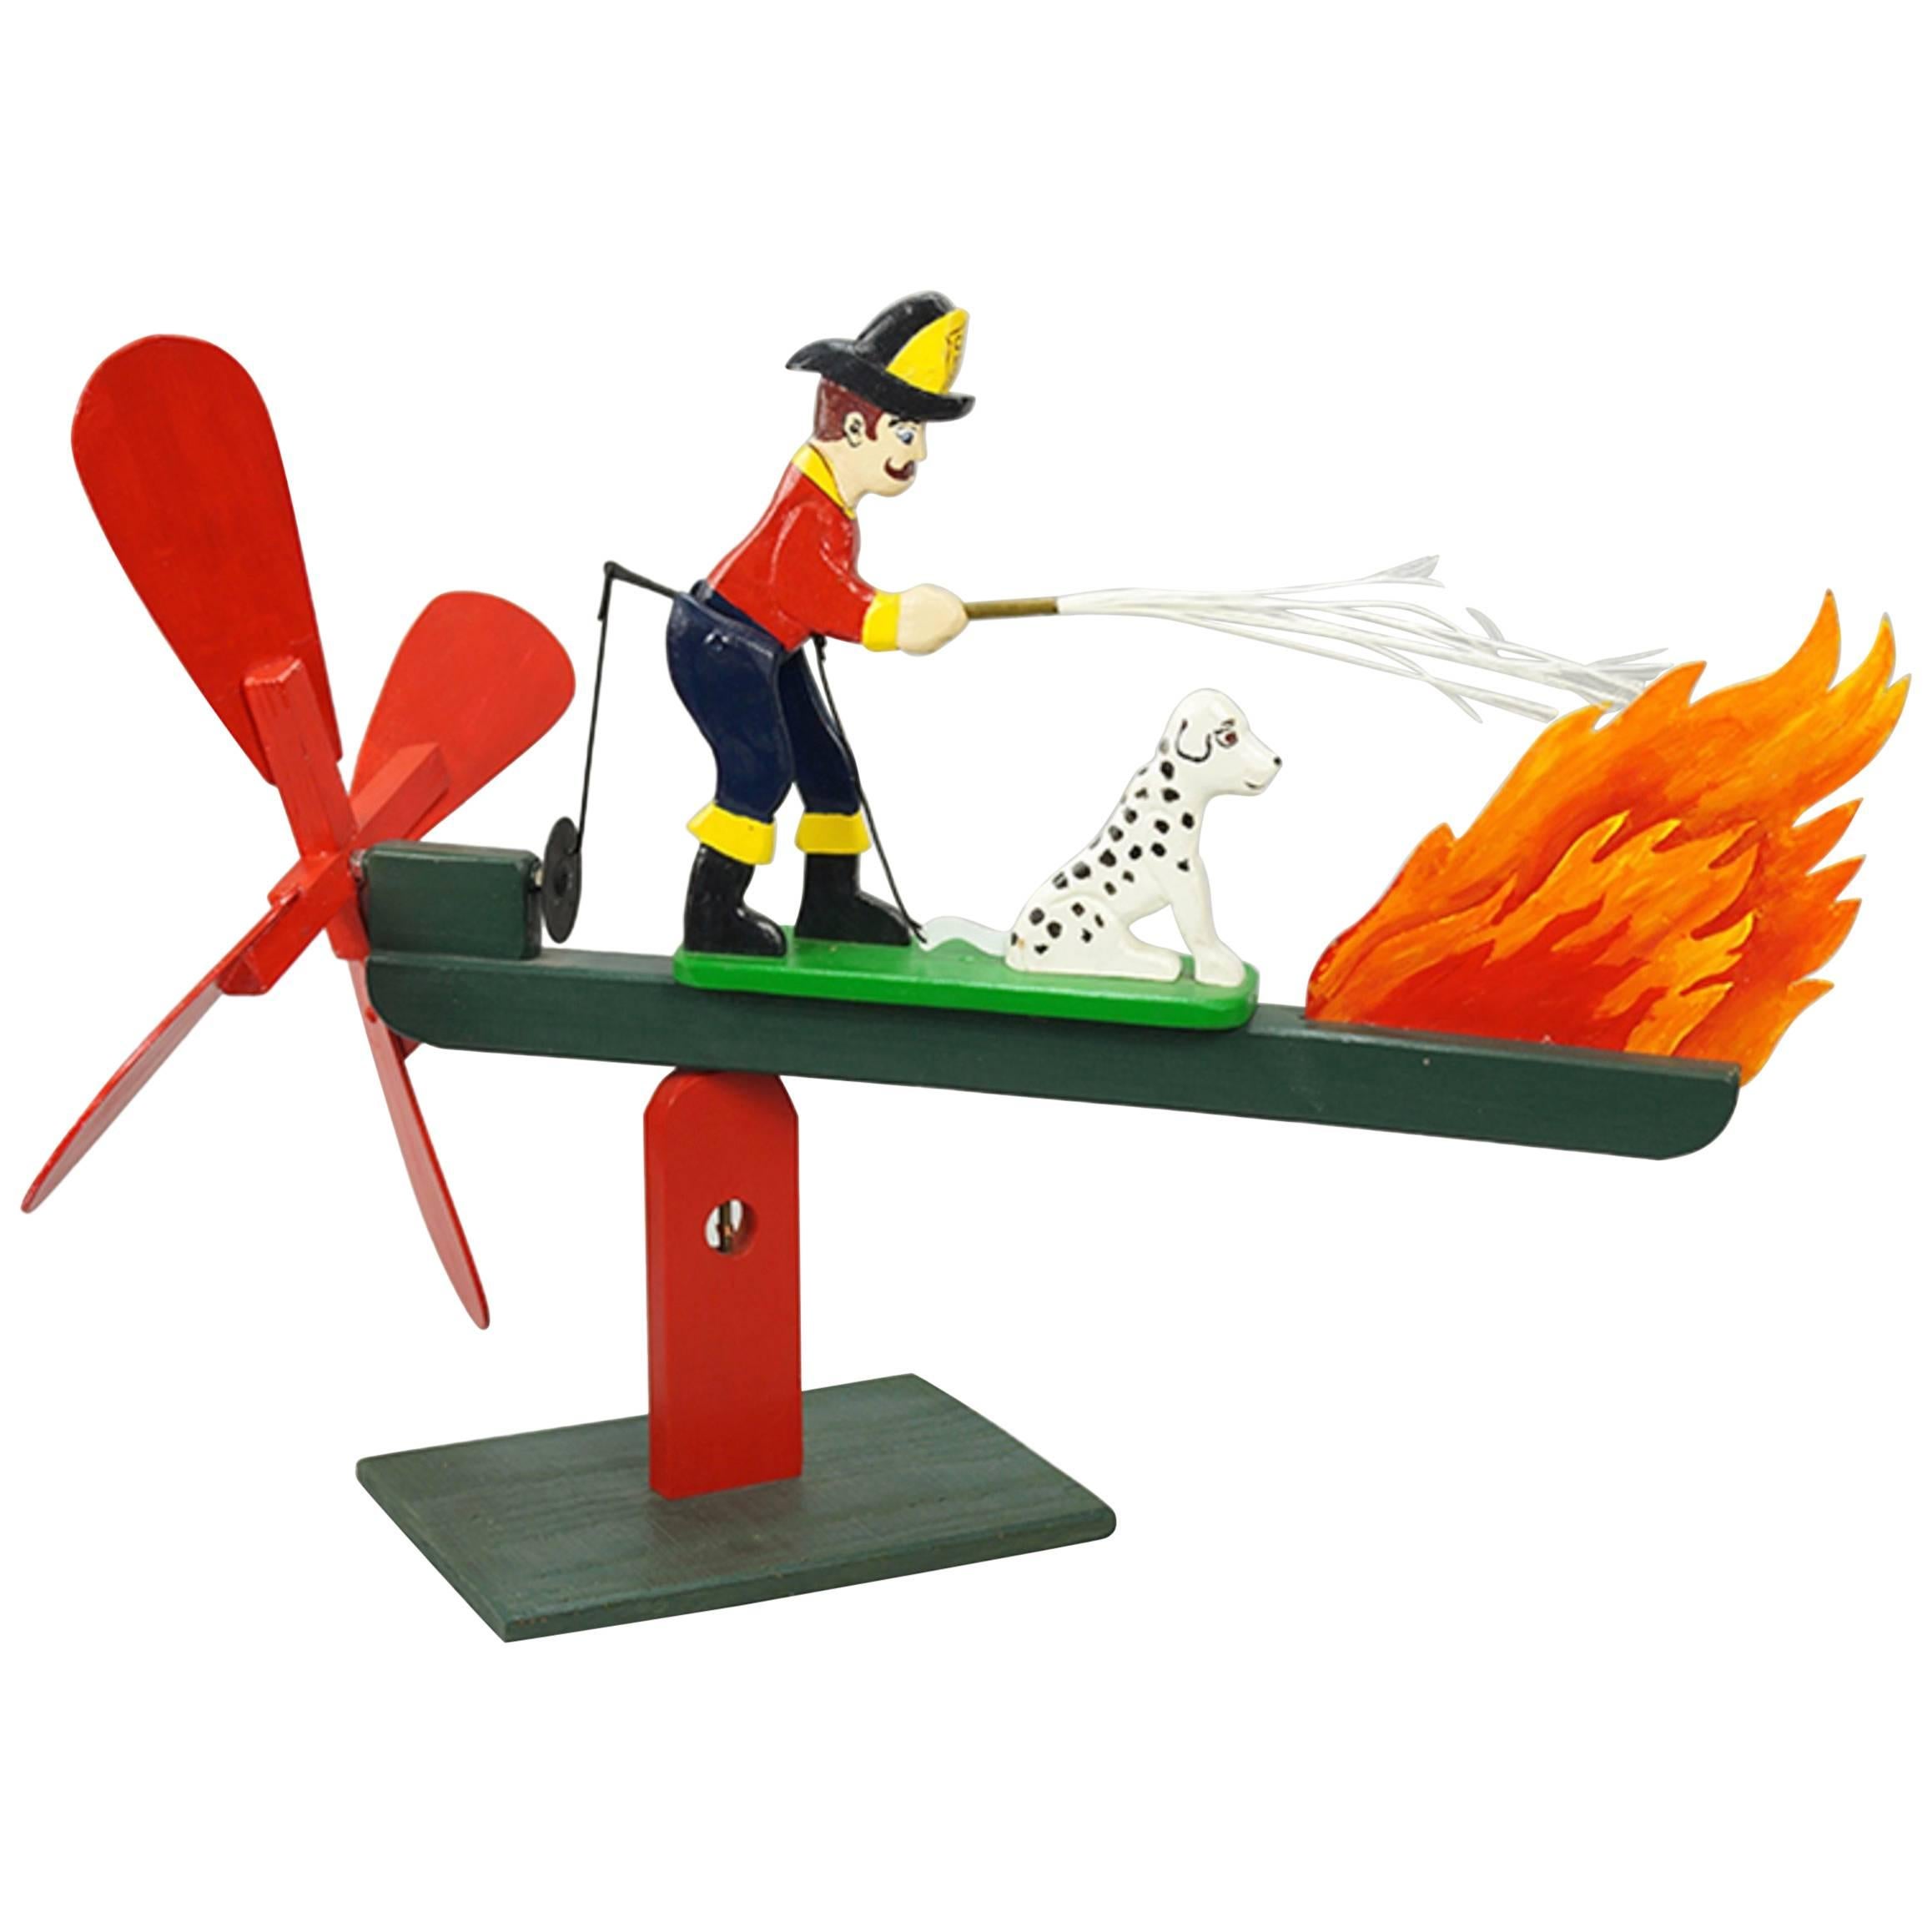 Norman Norman, American 20th Century, „The Fireman Whirligig“